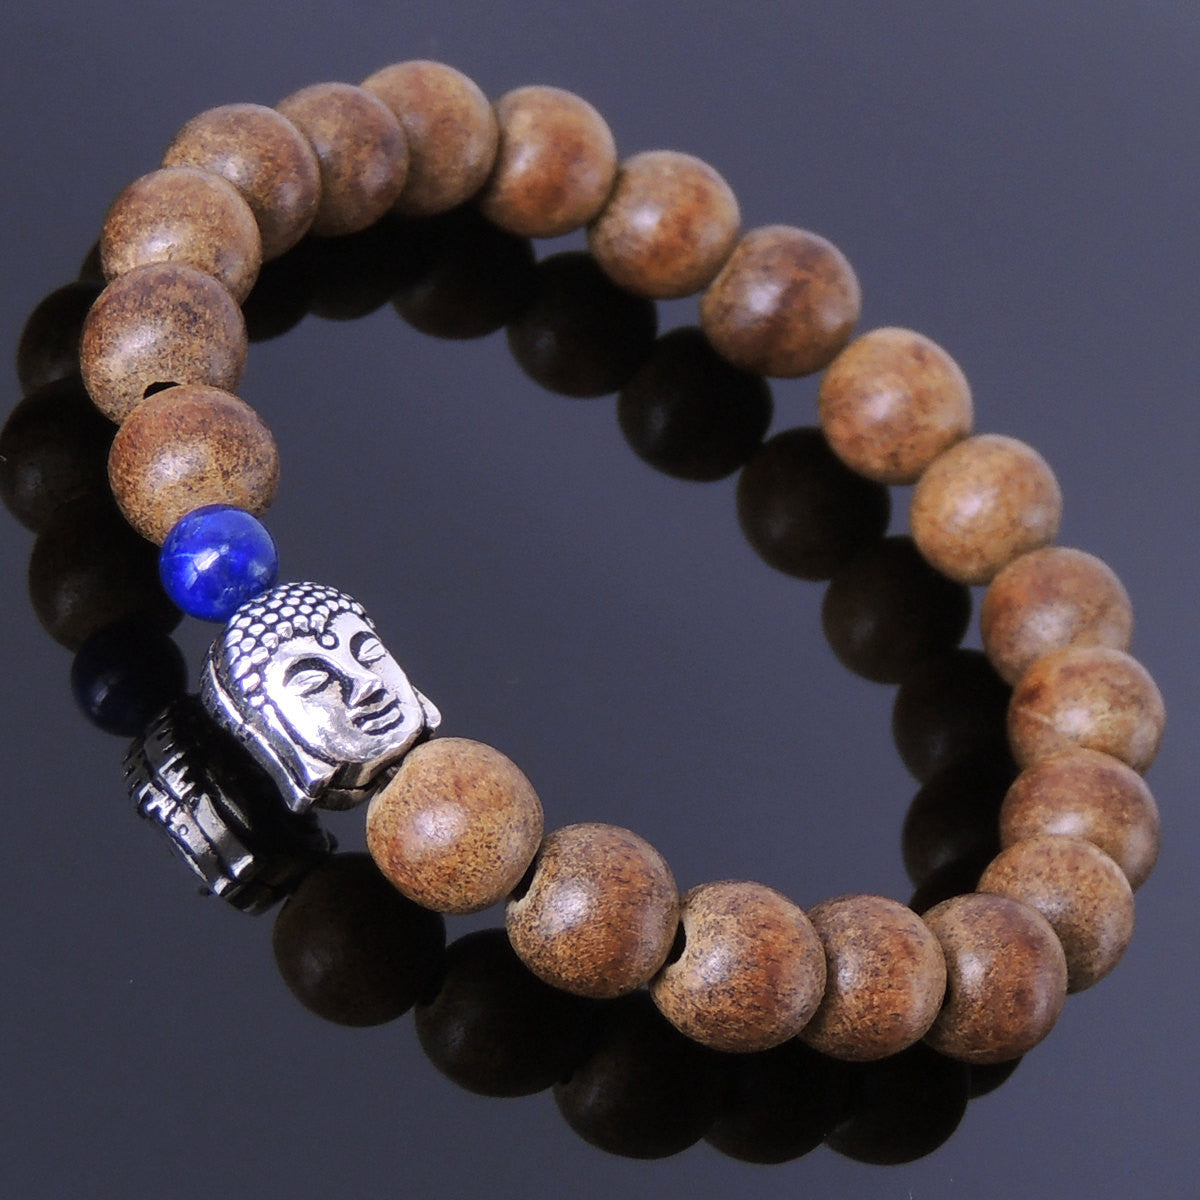 Lapis Lazuli & Agarwood Bracelet for Prayer & Meditation with S925 Sterling Silver Guanyin Buddha Protection Bead - Handmade by Gem & Silver BR215